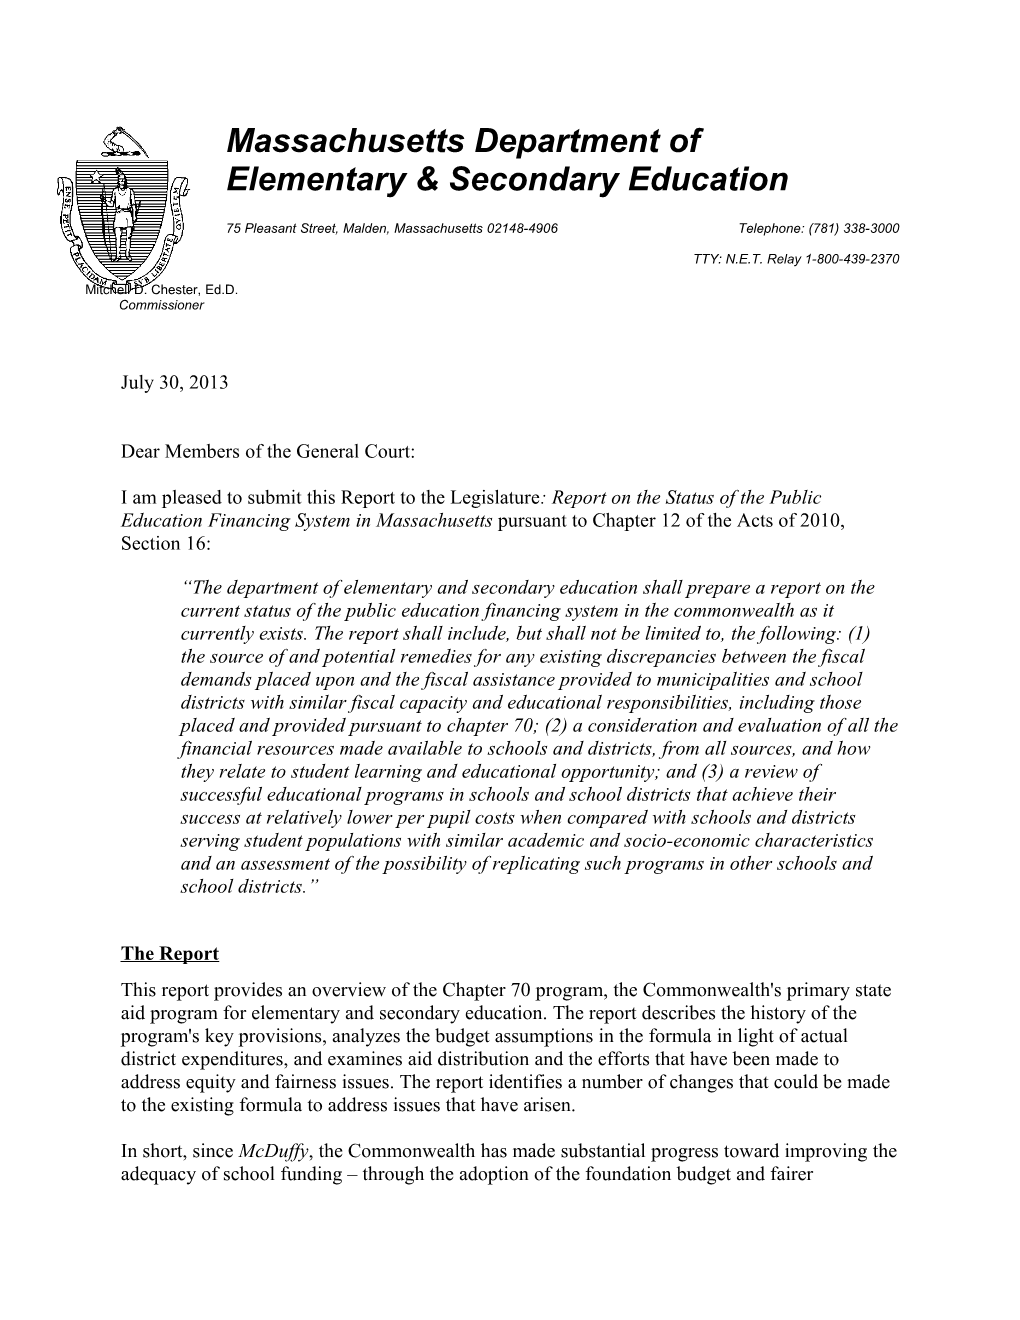 Report on the Status of the Public Education Financing System in Massachusetts